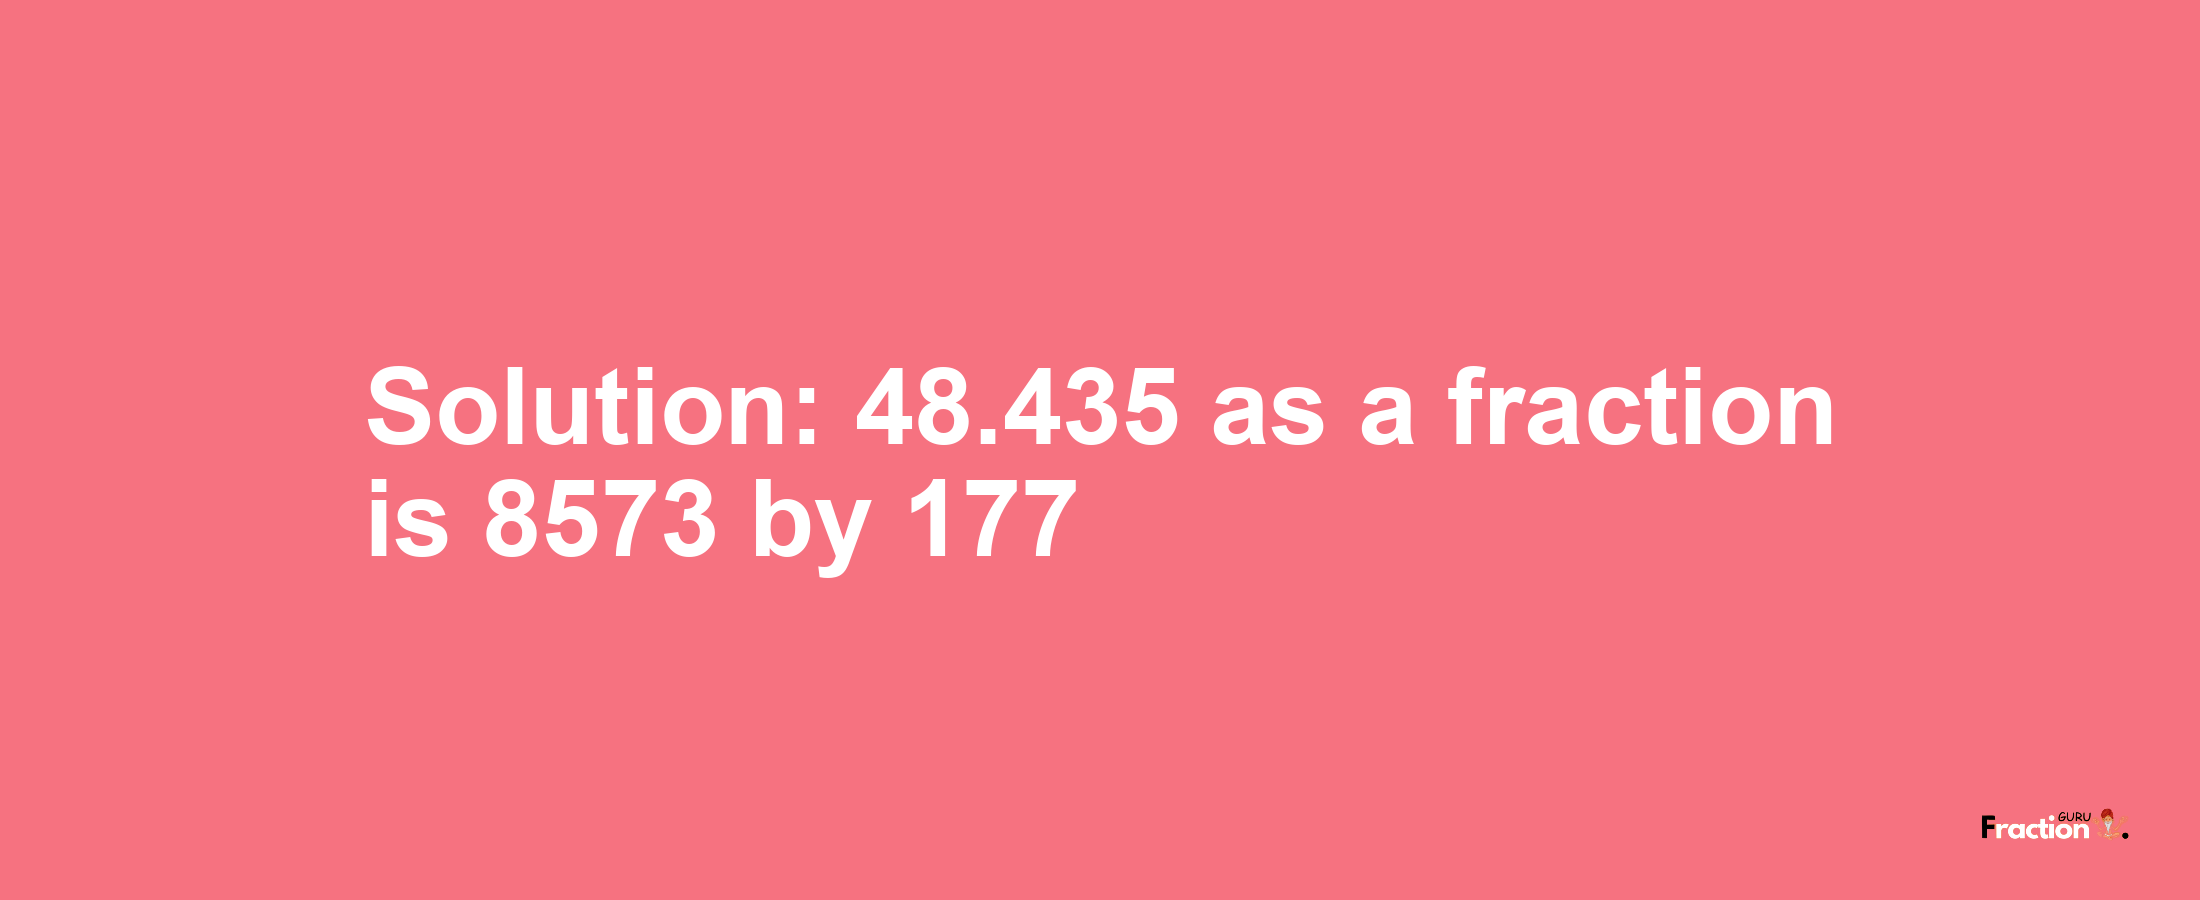 Solution:48.435 as a fraction is 8573/177